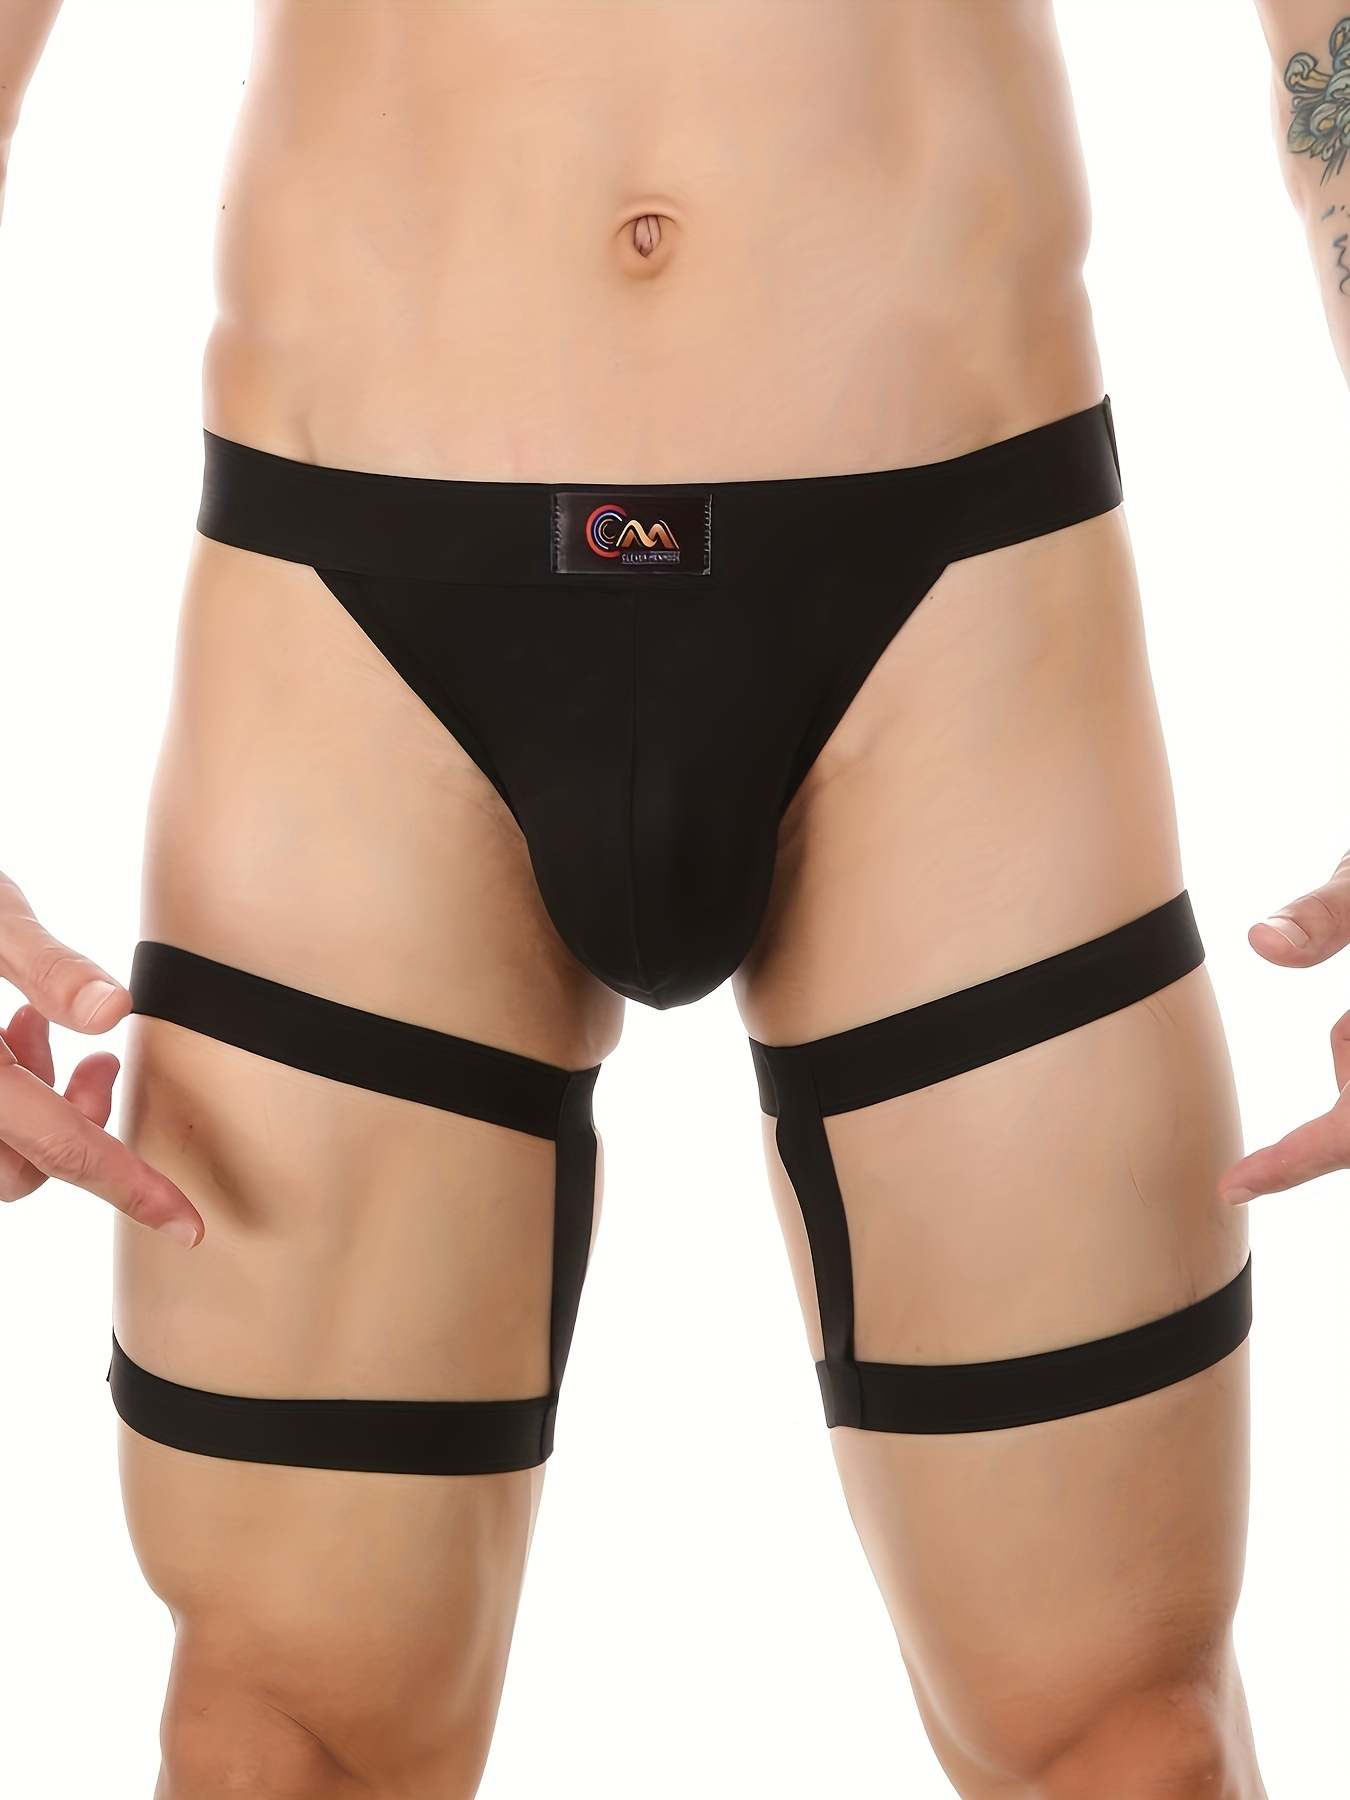 Male Thong with Metal Ring, Open Crotch G-String Underwear - Stylish Design